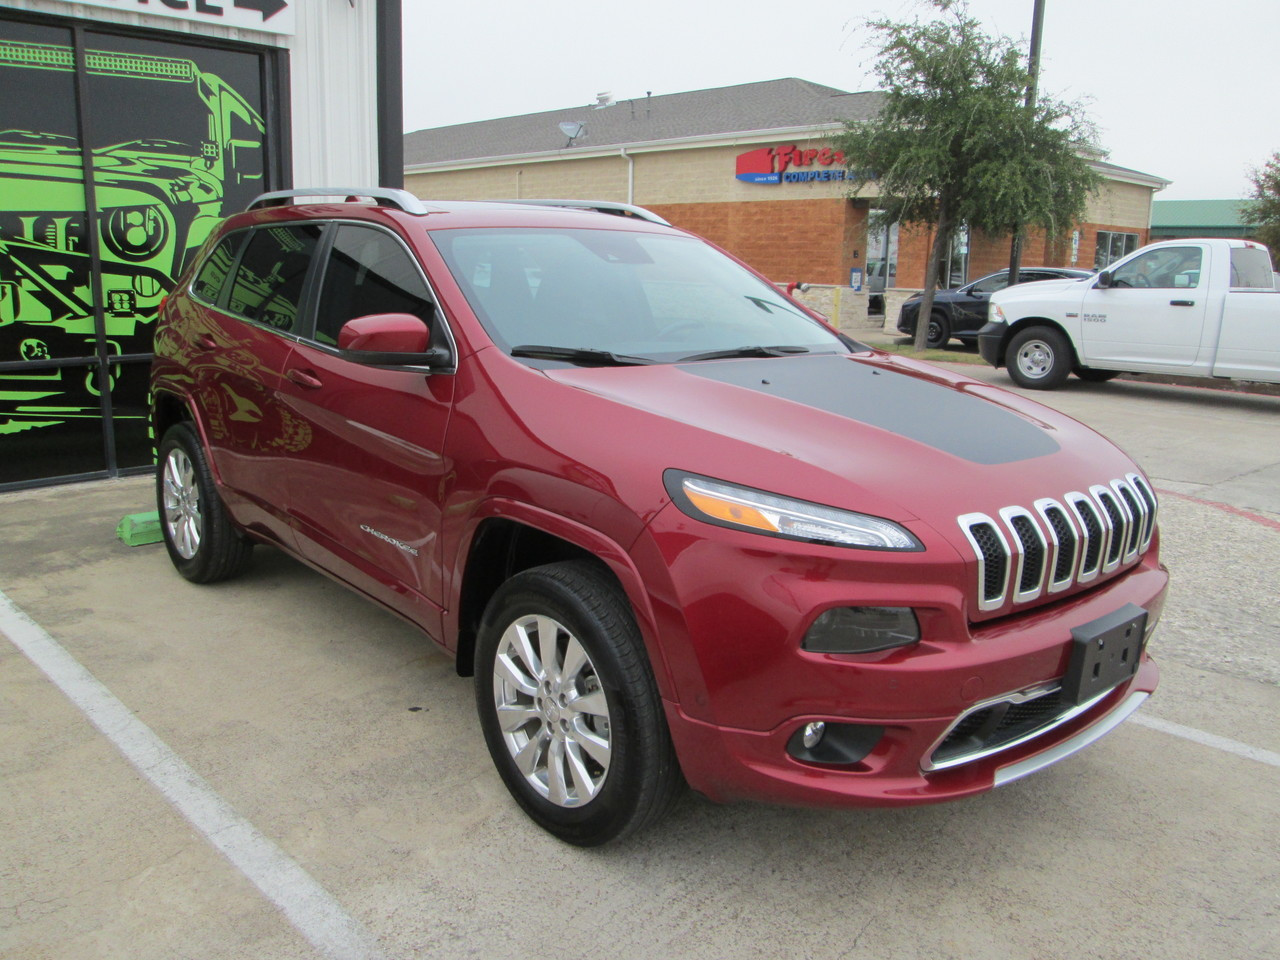 SOLD 2017 Jeep Cherokee Overland 4x4 Stock# 525254 SALE PRICED! $10k discount